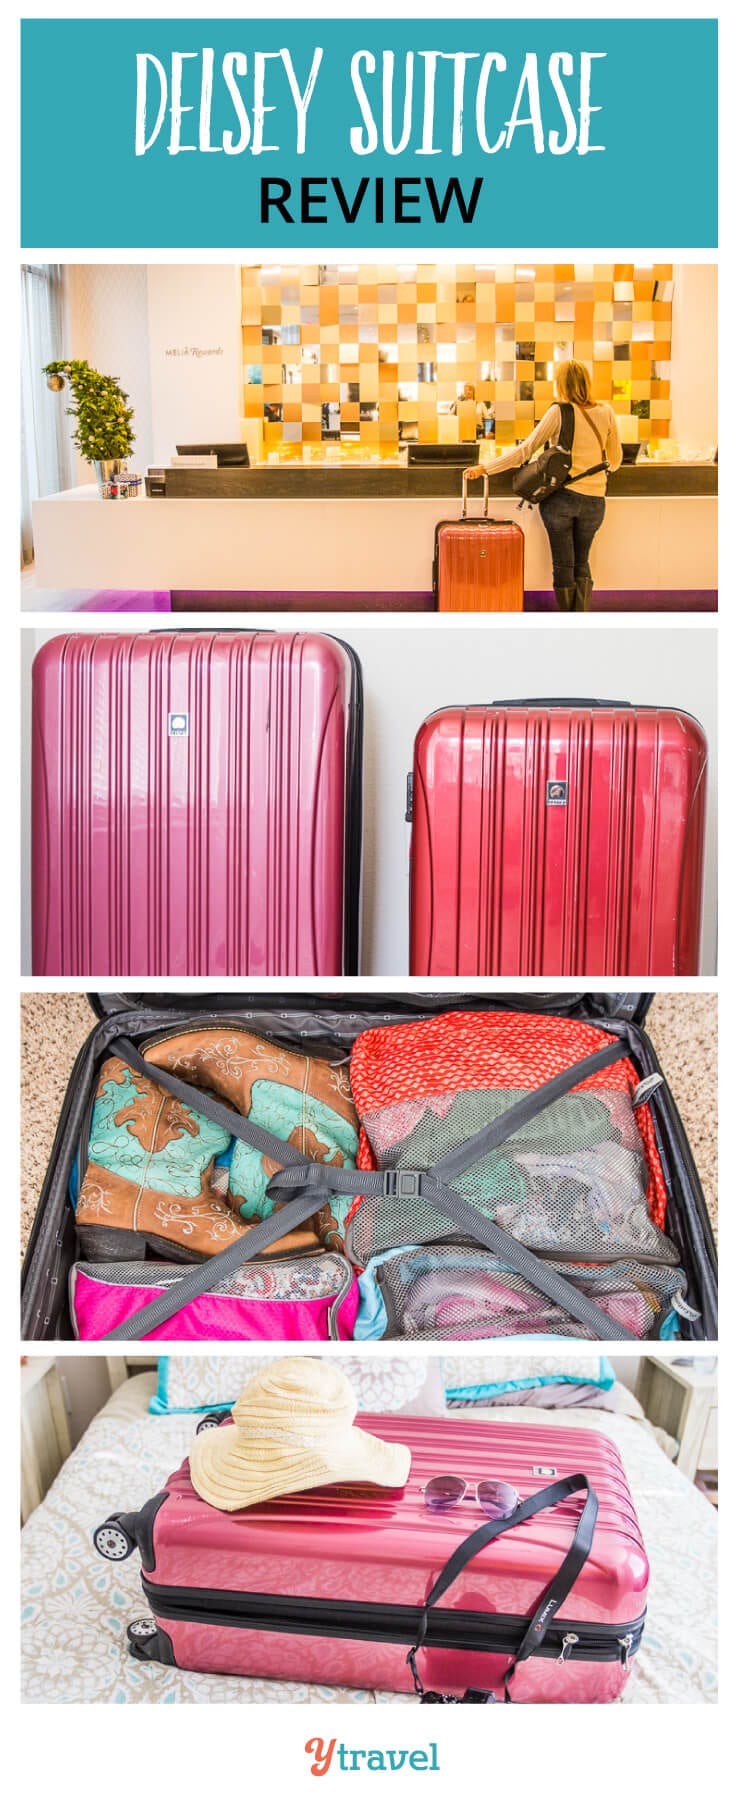 Delsey luggage review - one of the best travel suitcases for style, ease, and durability.